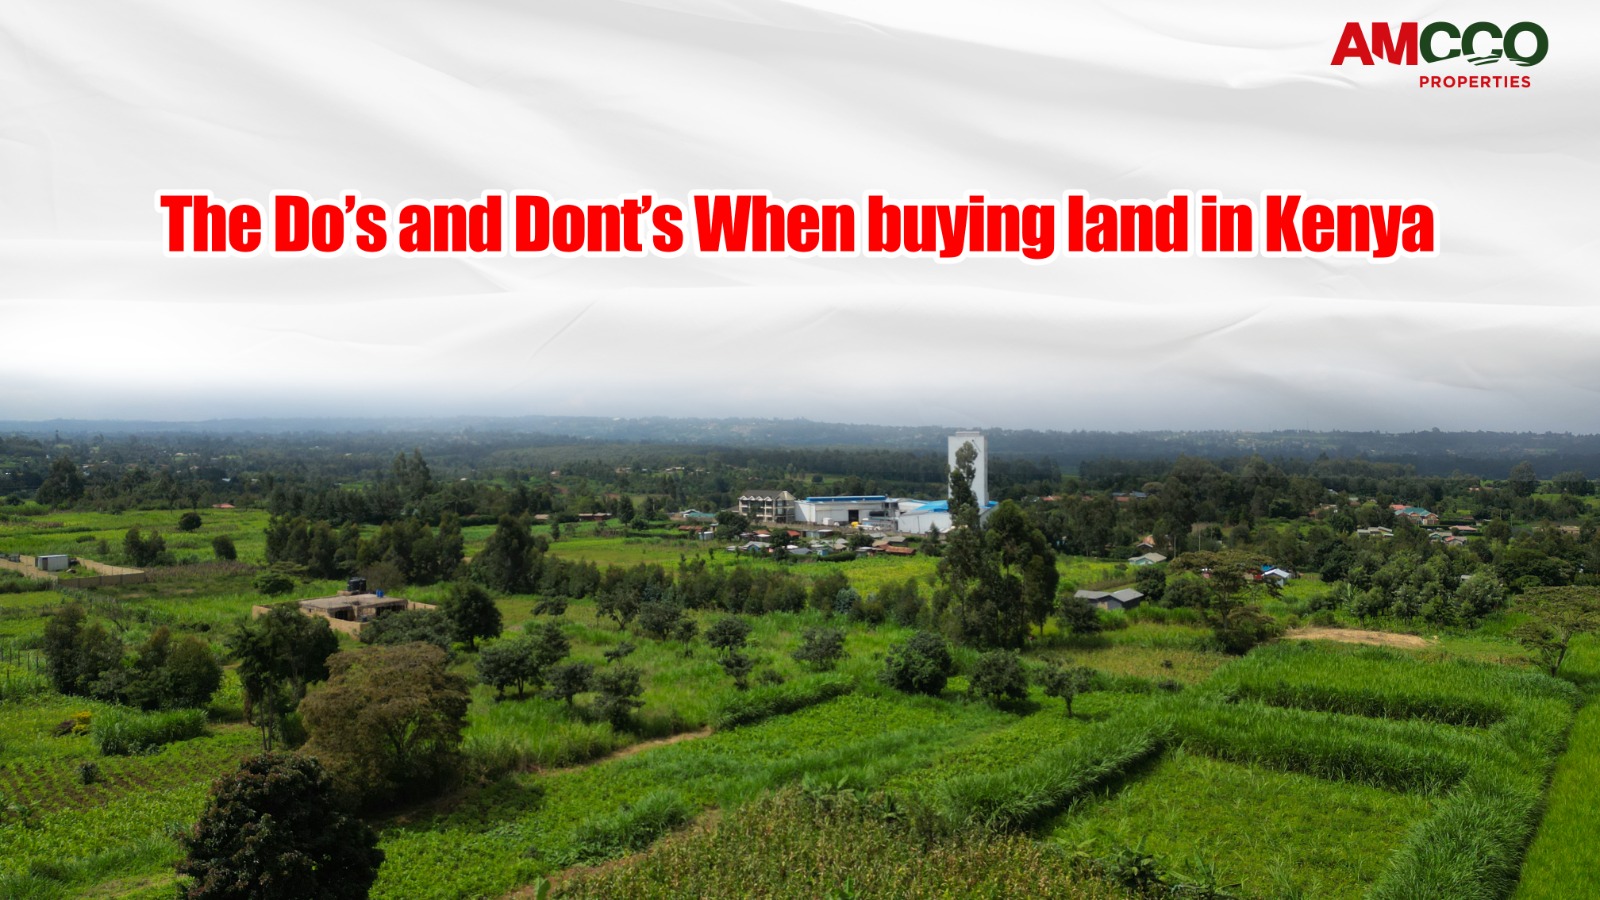 The Dos and Don’ts When Buying Land in Kenya: A Guide by AMCCO Properties Limited.